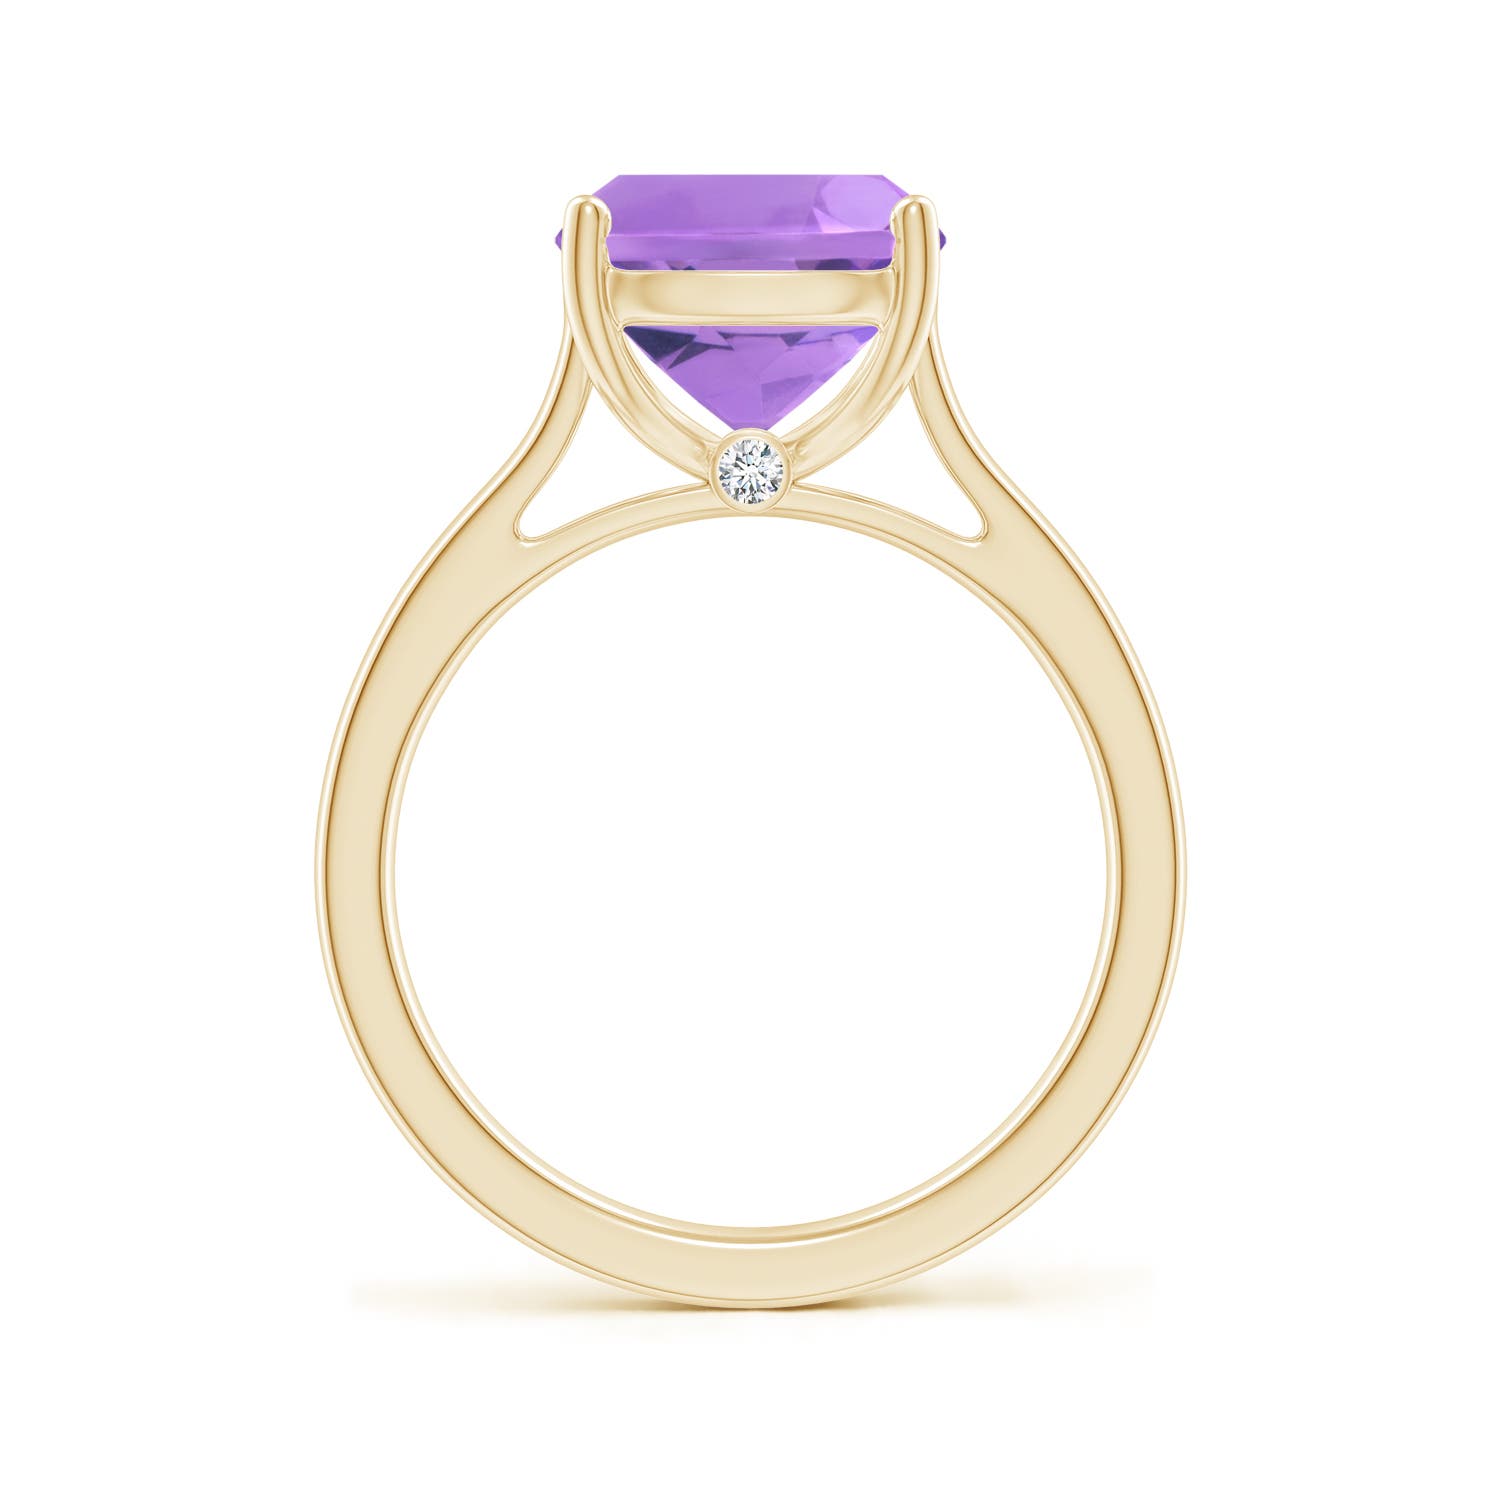 A - Amethyst / 3.53 CT / 14 KT Yellow Gold